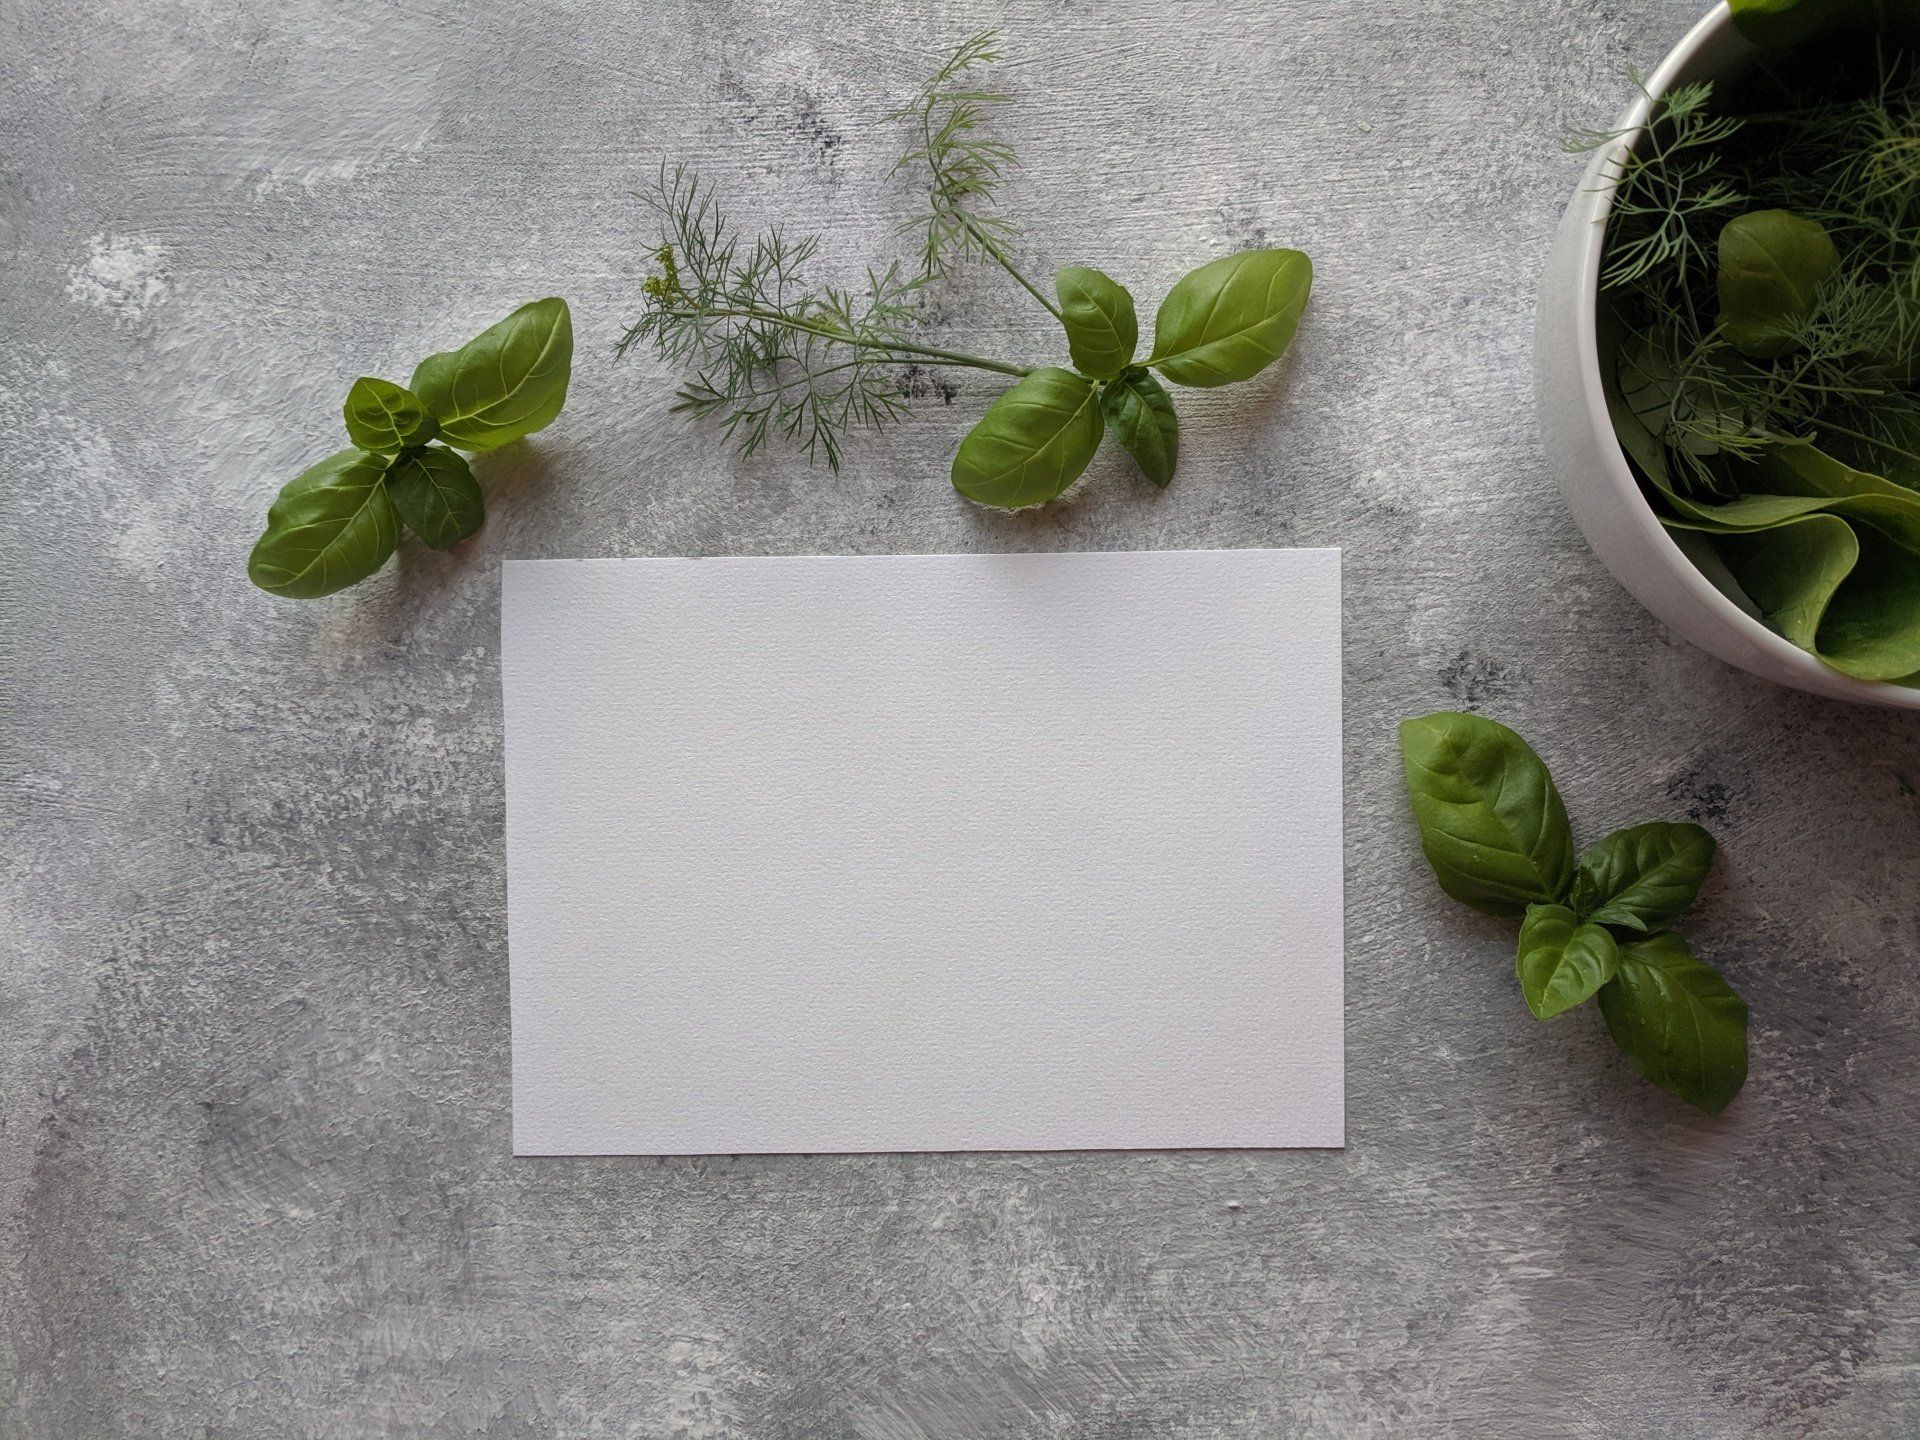 There is a bowl of herbs and a piece of paper on the table.